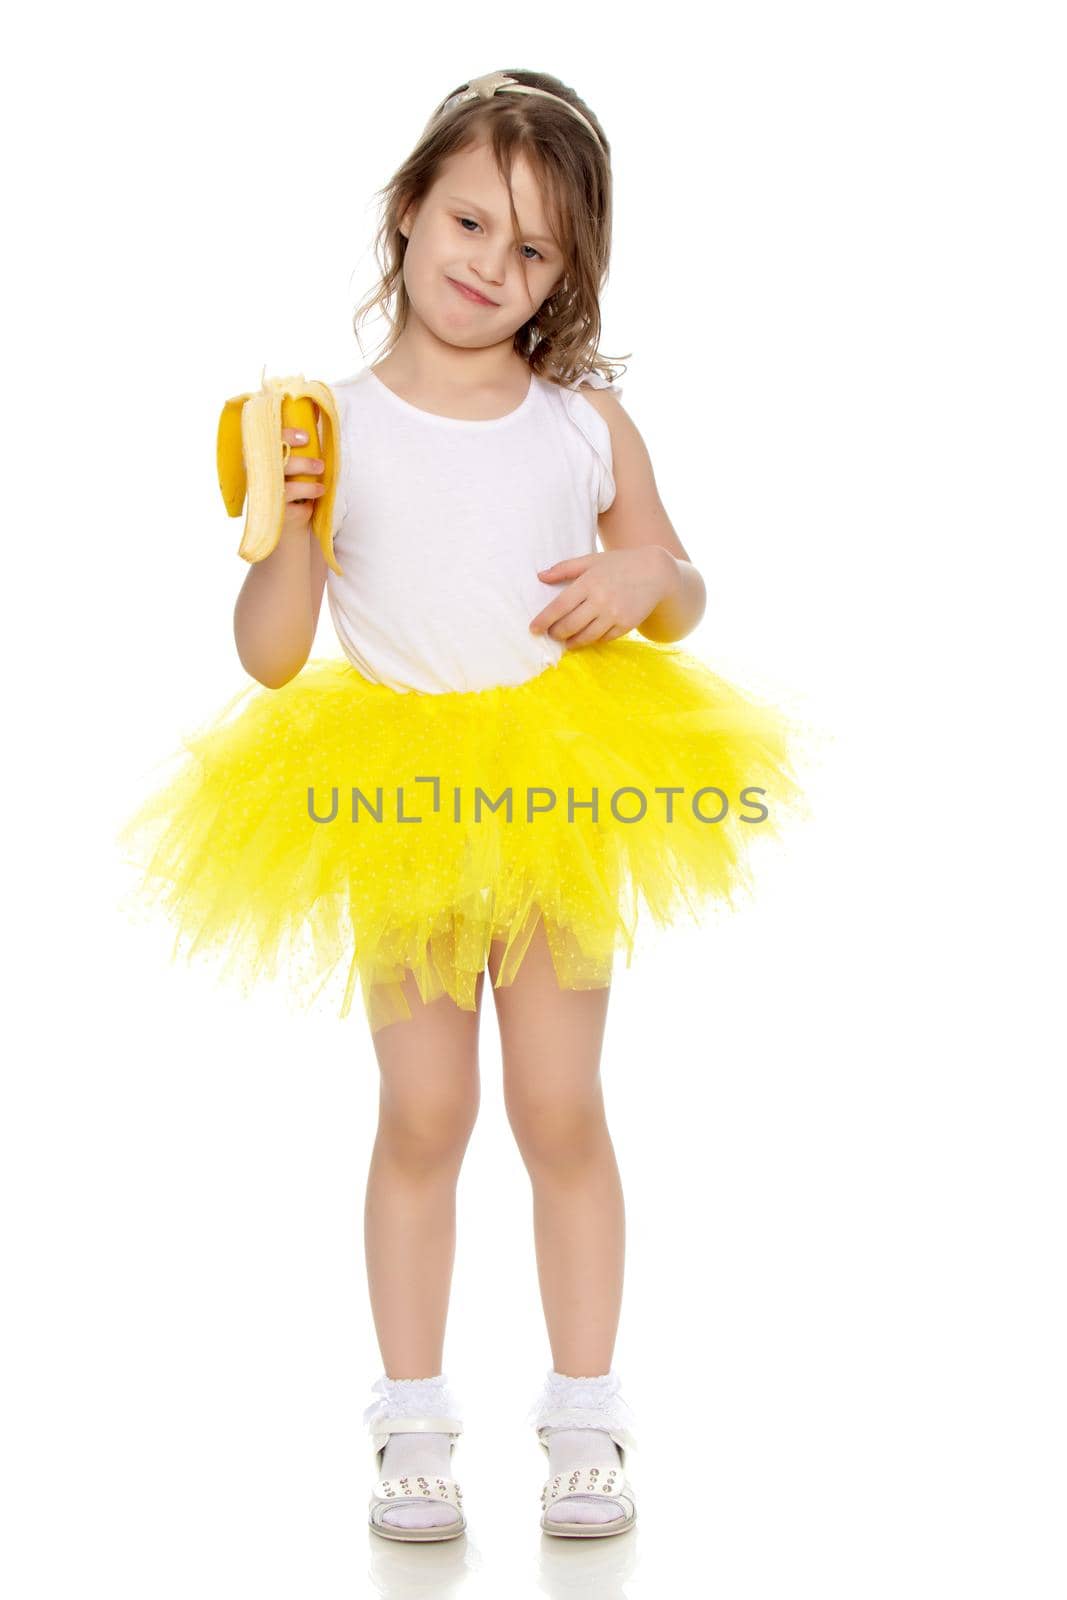 Joyful little blonde girl in a short yellow skirt and yellow bow on her head.She's holding a banana.Isolated on white background.